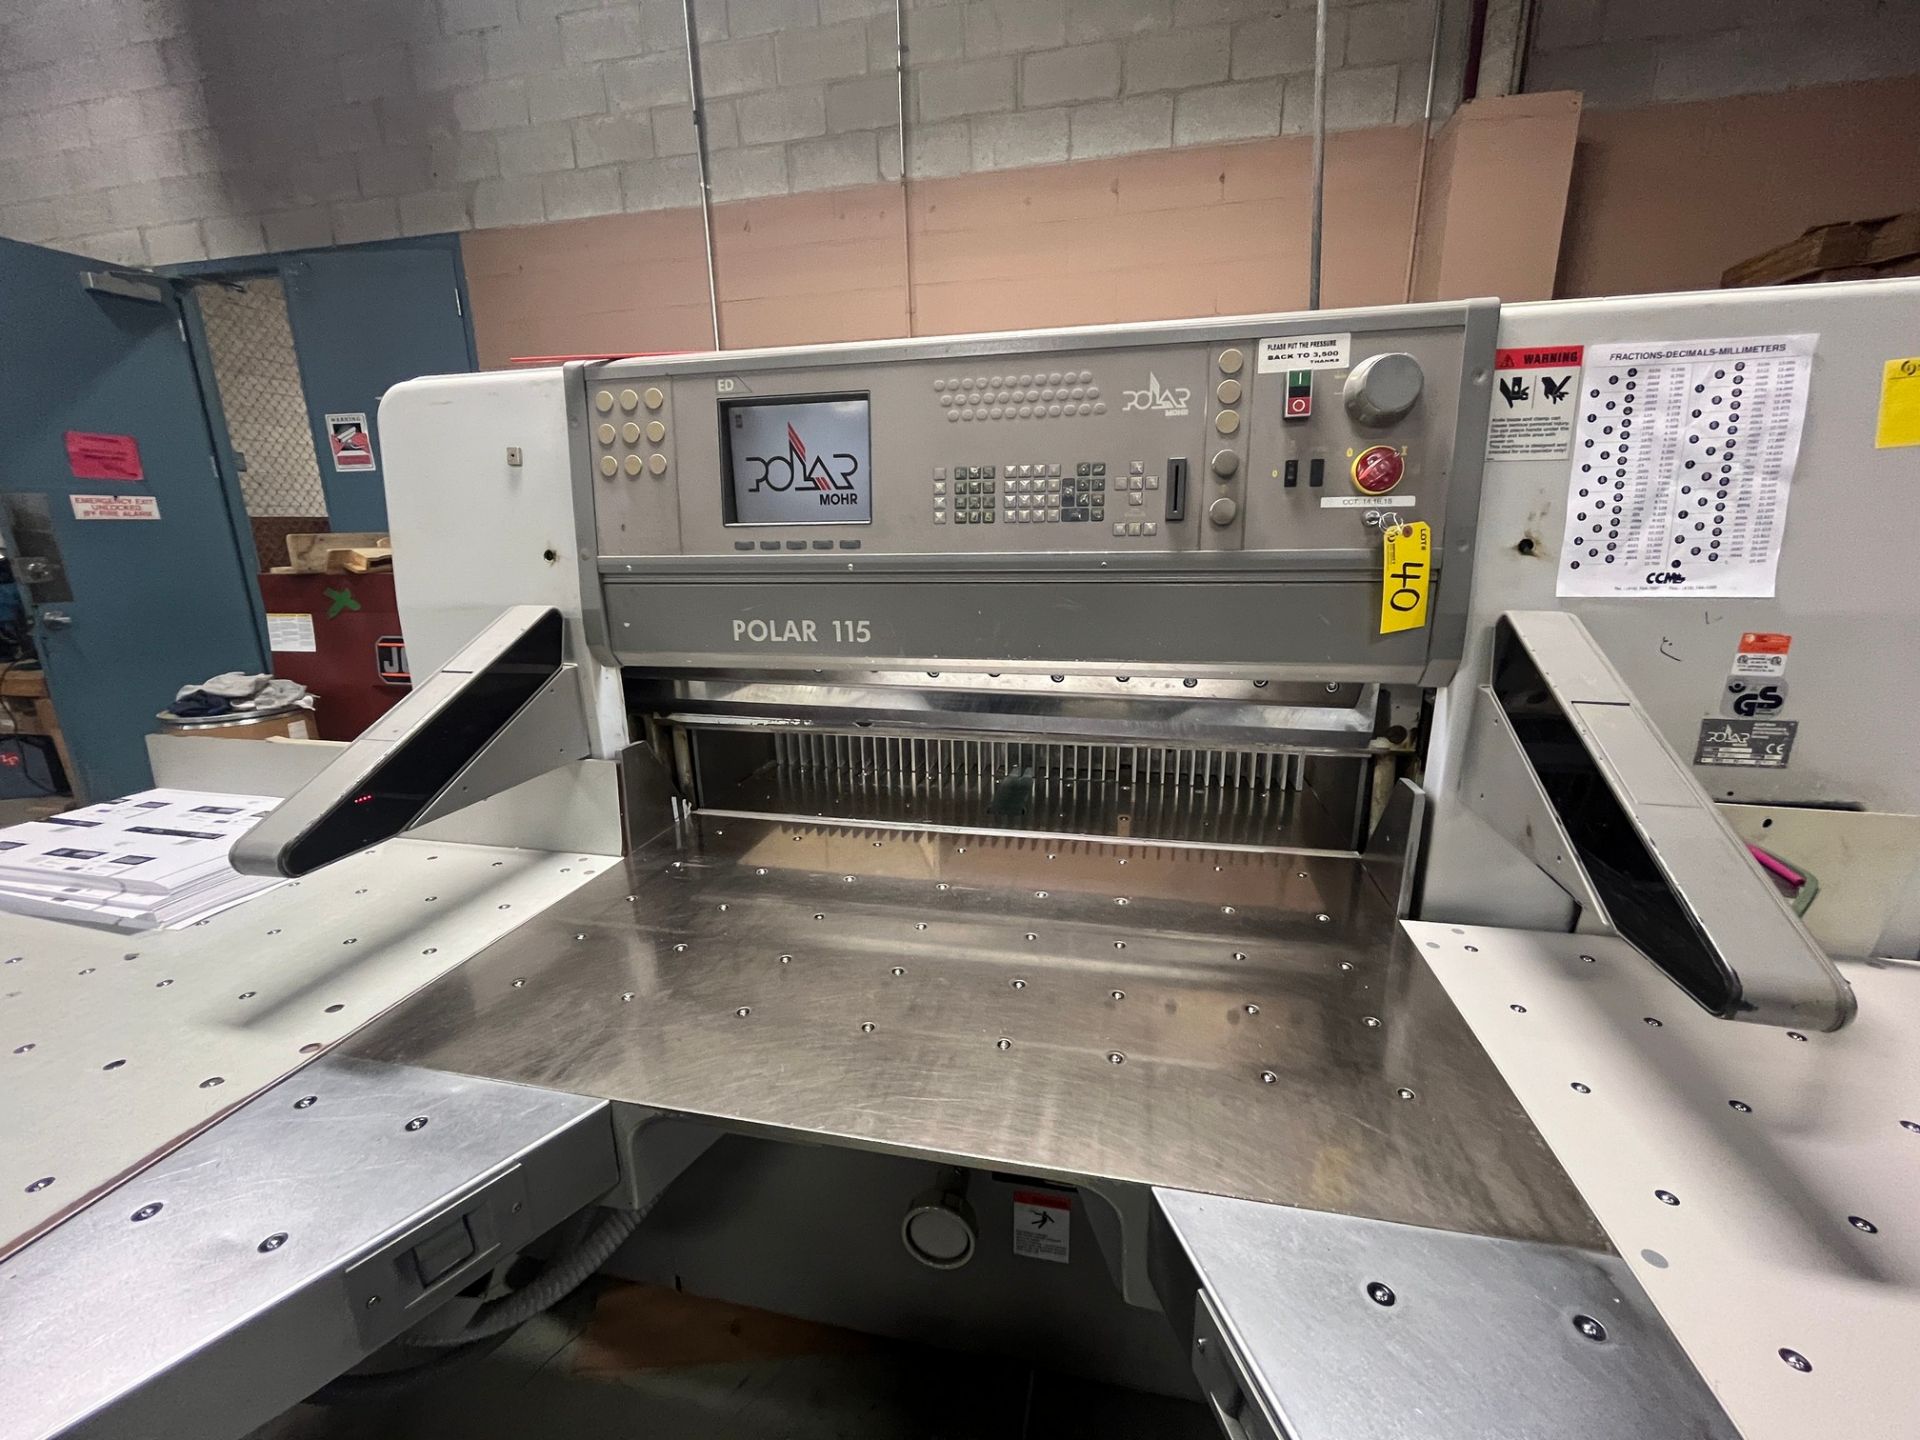 2000 POLAR MOHR 115 ED 45” PROGRAMMABLE PAPER CUTTER / GUILLOTINE CUTTER, S/N 7031262 - Image 3 of 5